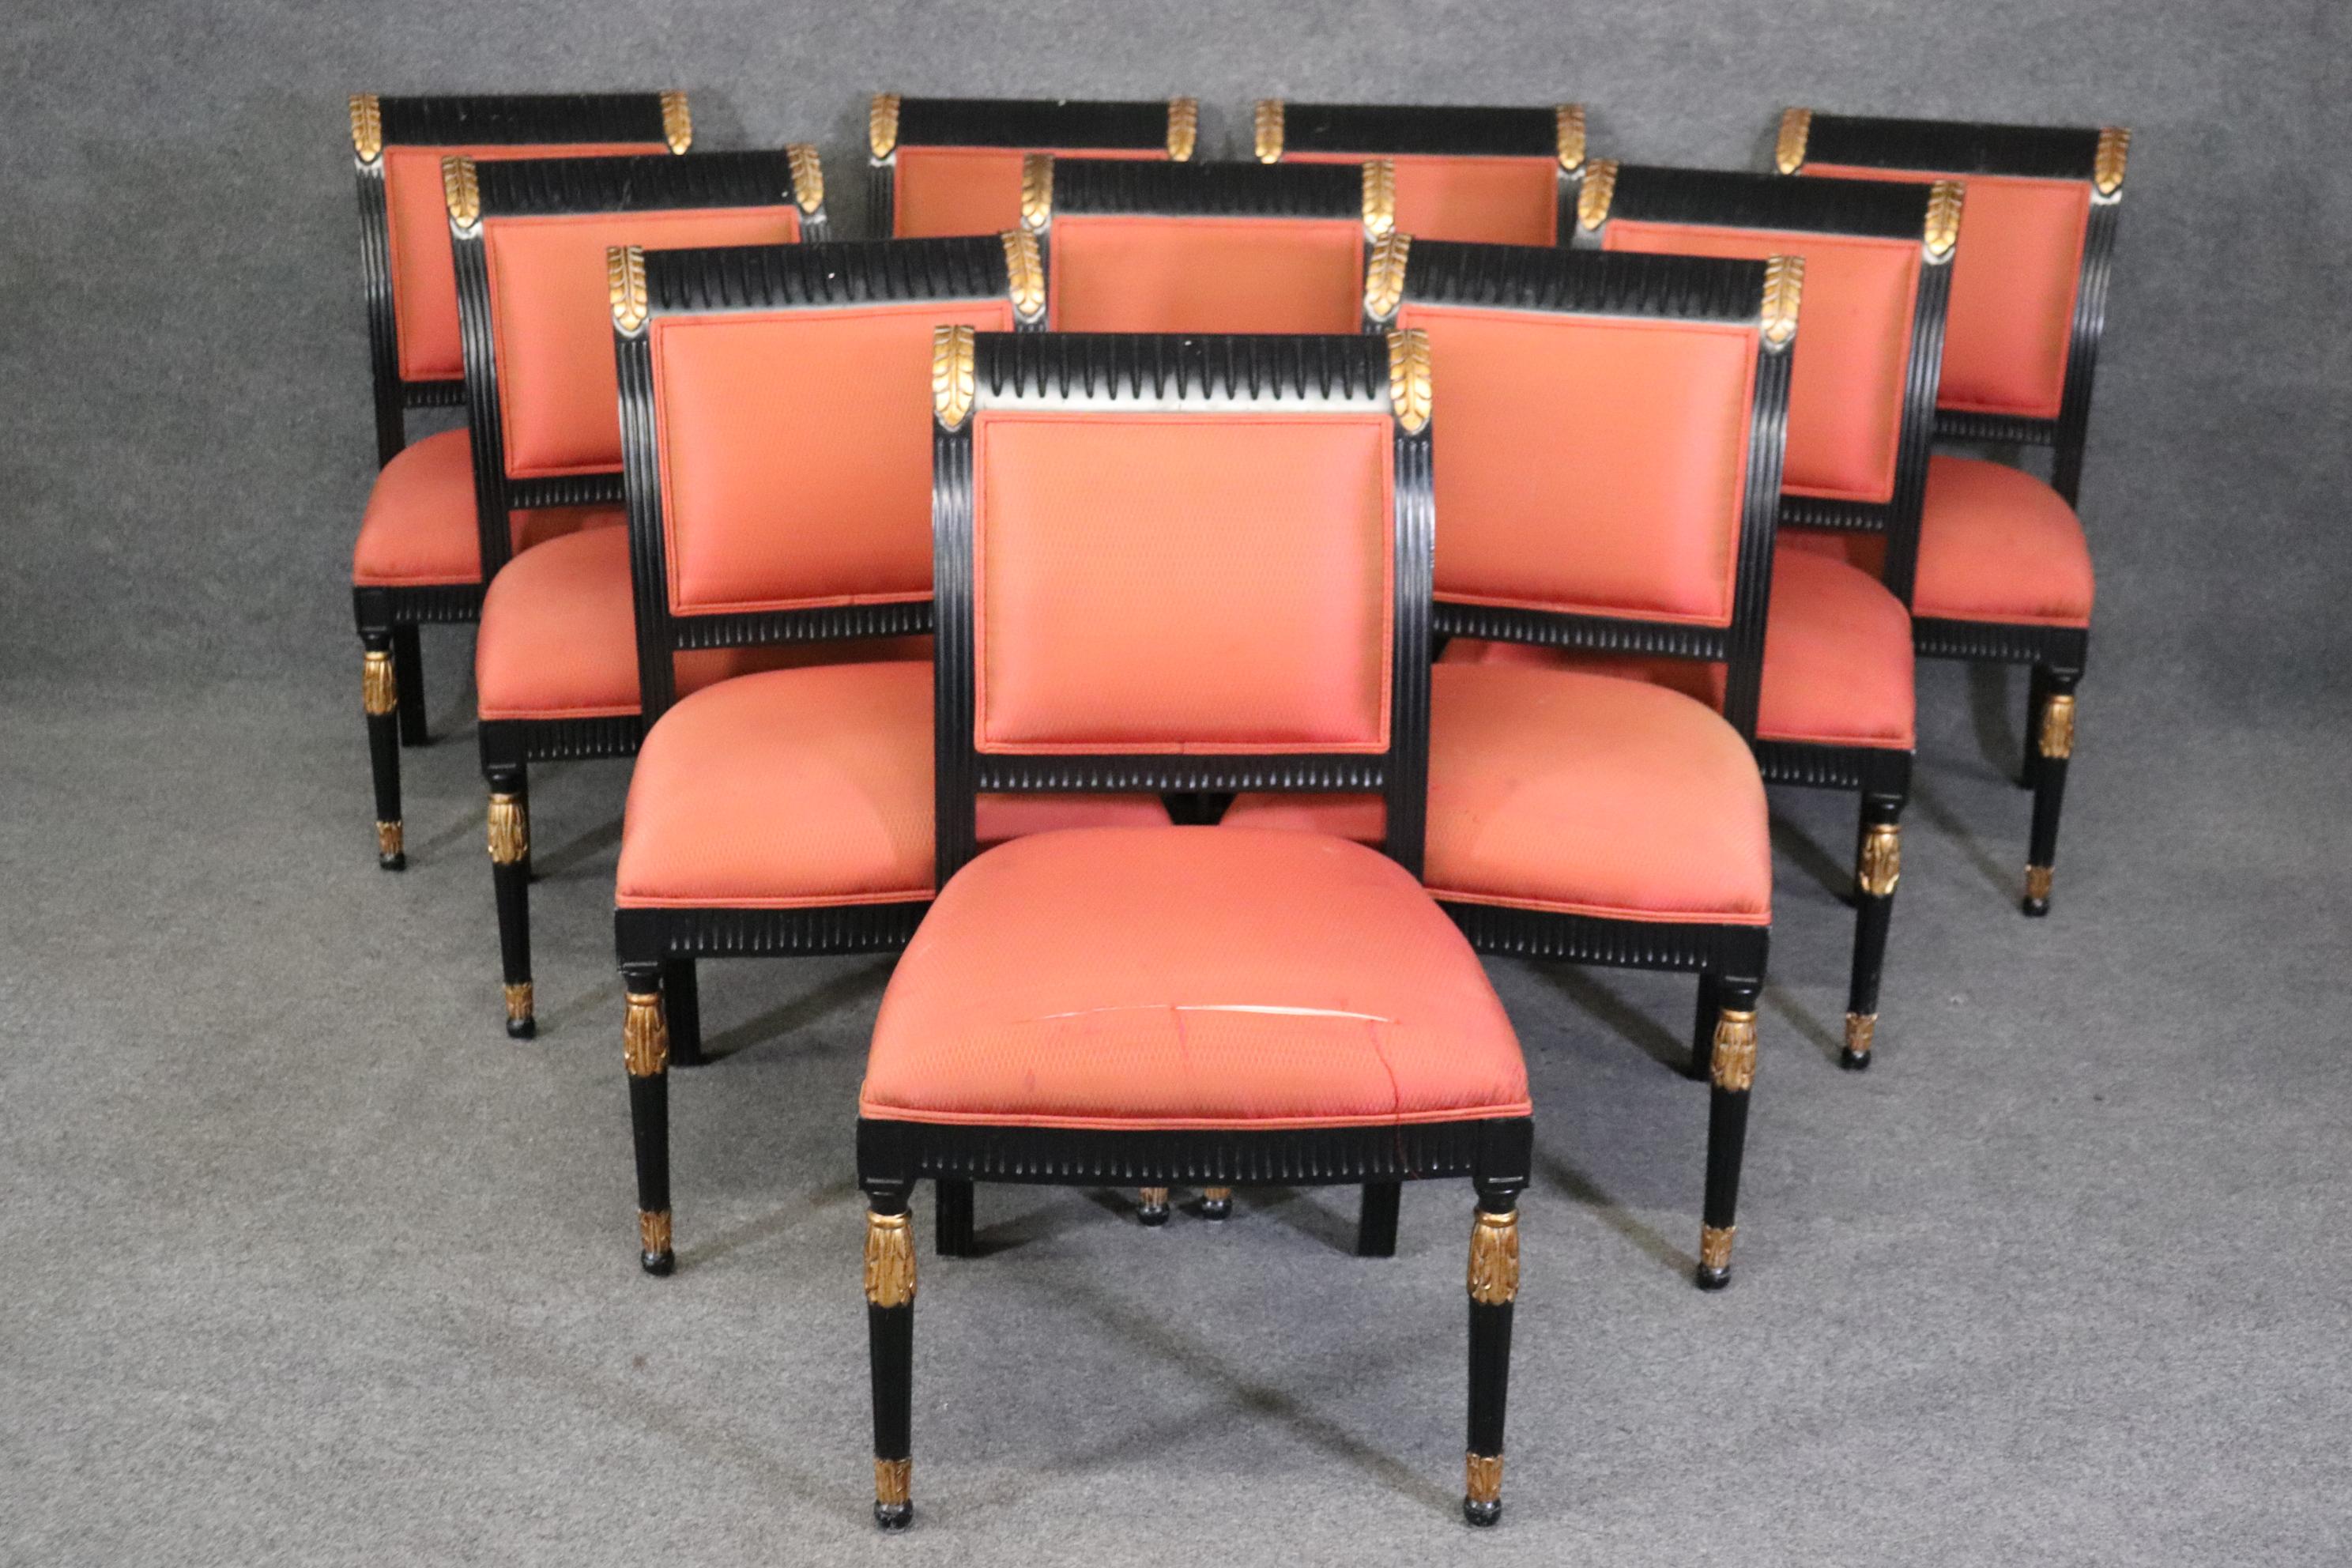 This is a gorgeous set of 10 French Directoire style sidechairs in black lacquer and gold from the 1960s era. The chairs are in good condition as far as their frames are concerned but will need reupholstery. They measure 36.75 tall x 22 wide x 24.75